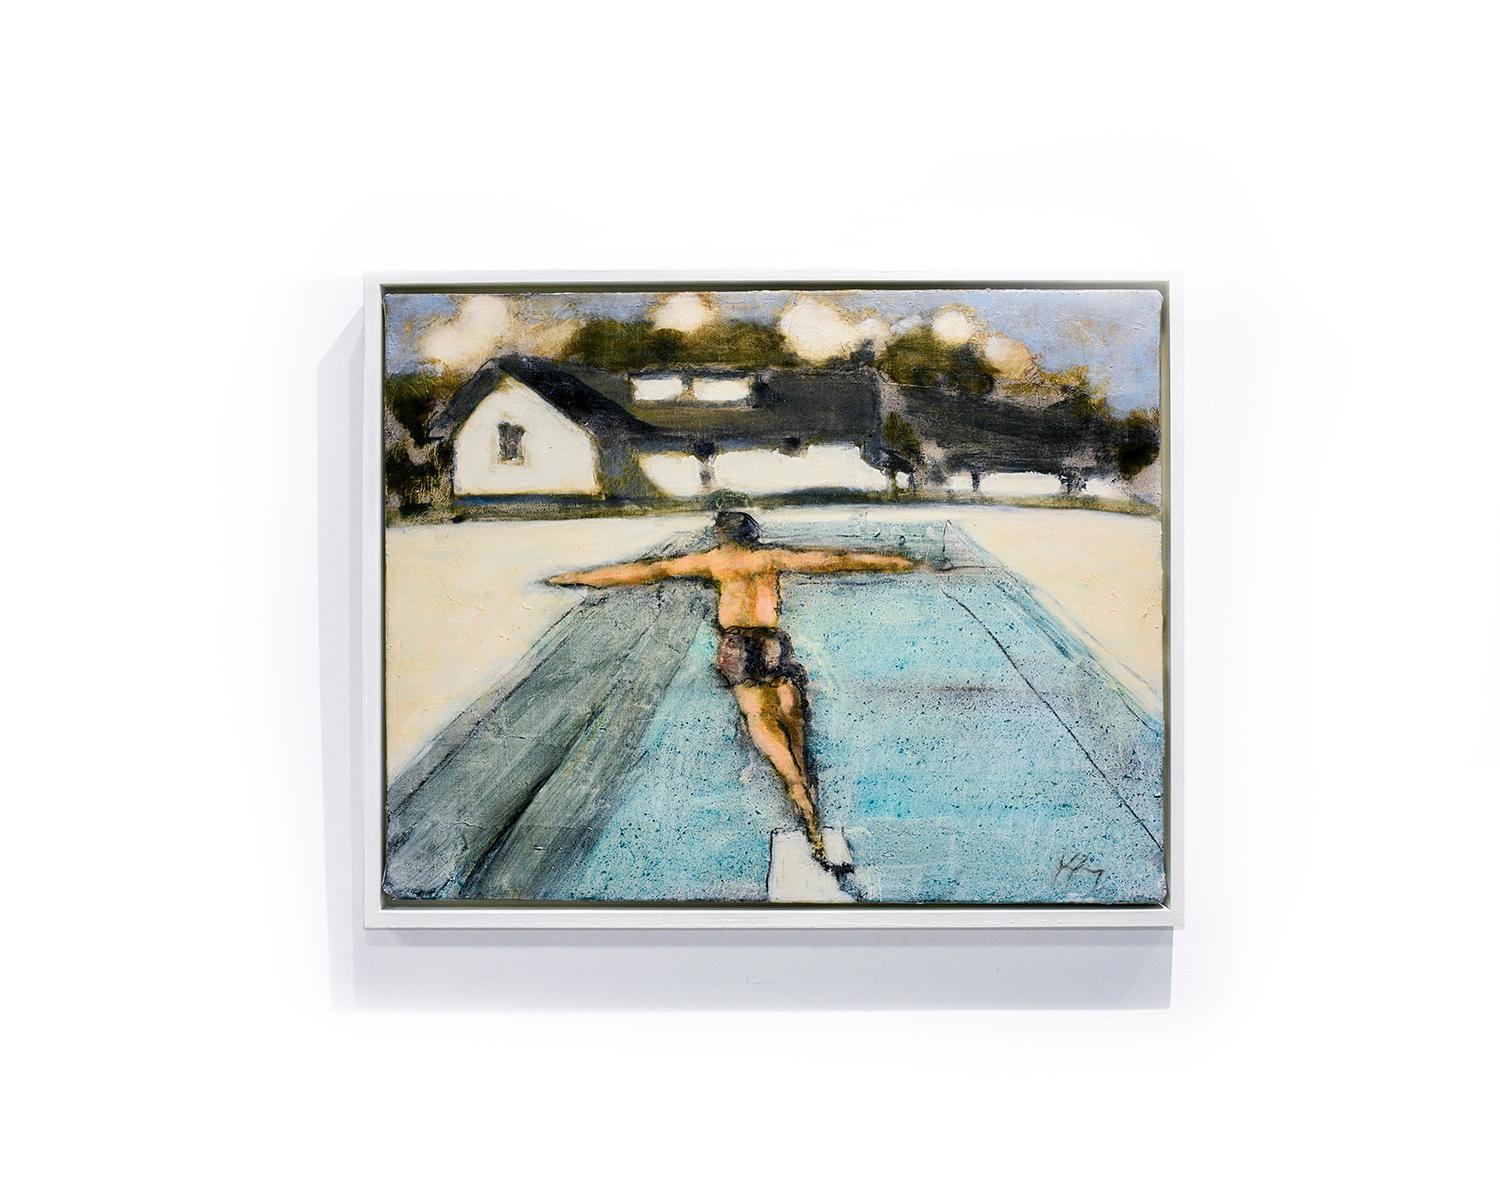 Gestural figurative painting of abstracted landscape and swimmer with blue pool by David Konigsberg
Springboard, painted in 2008 by David Konigsberg
19 1/2